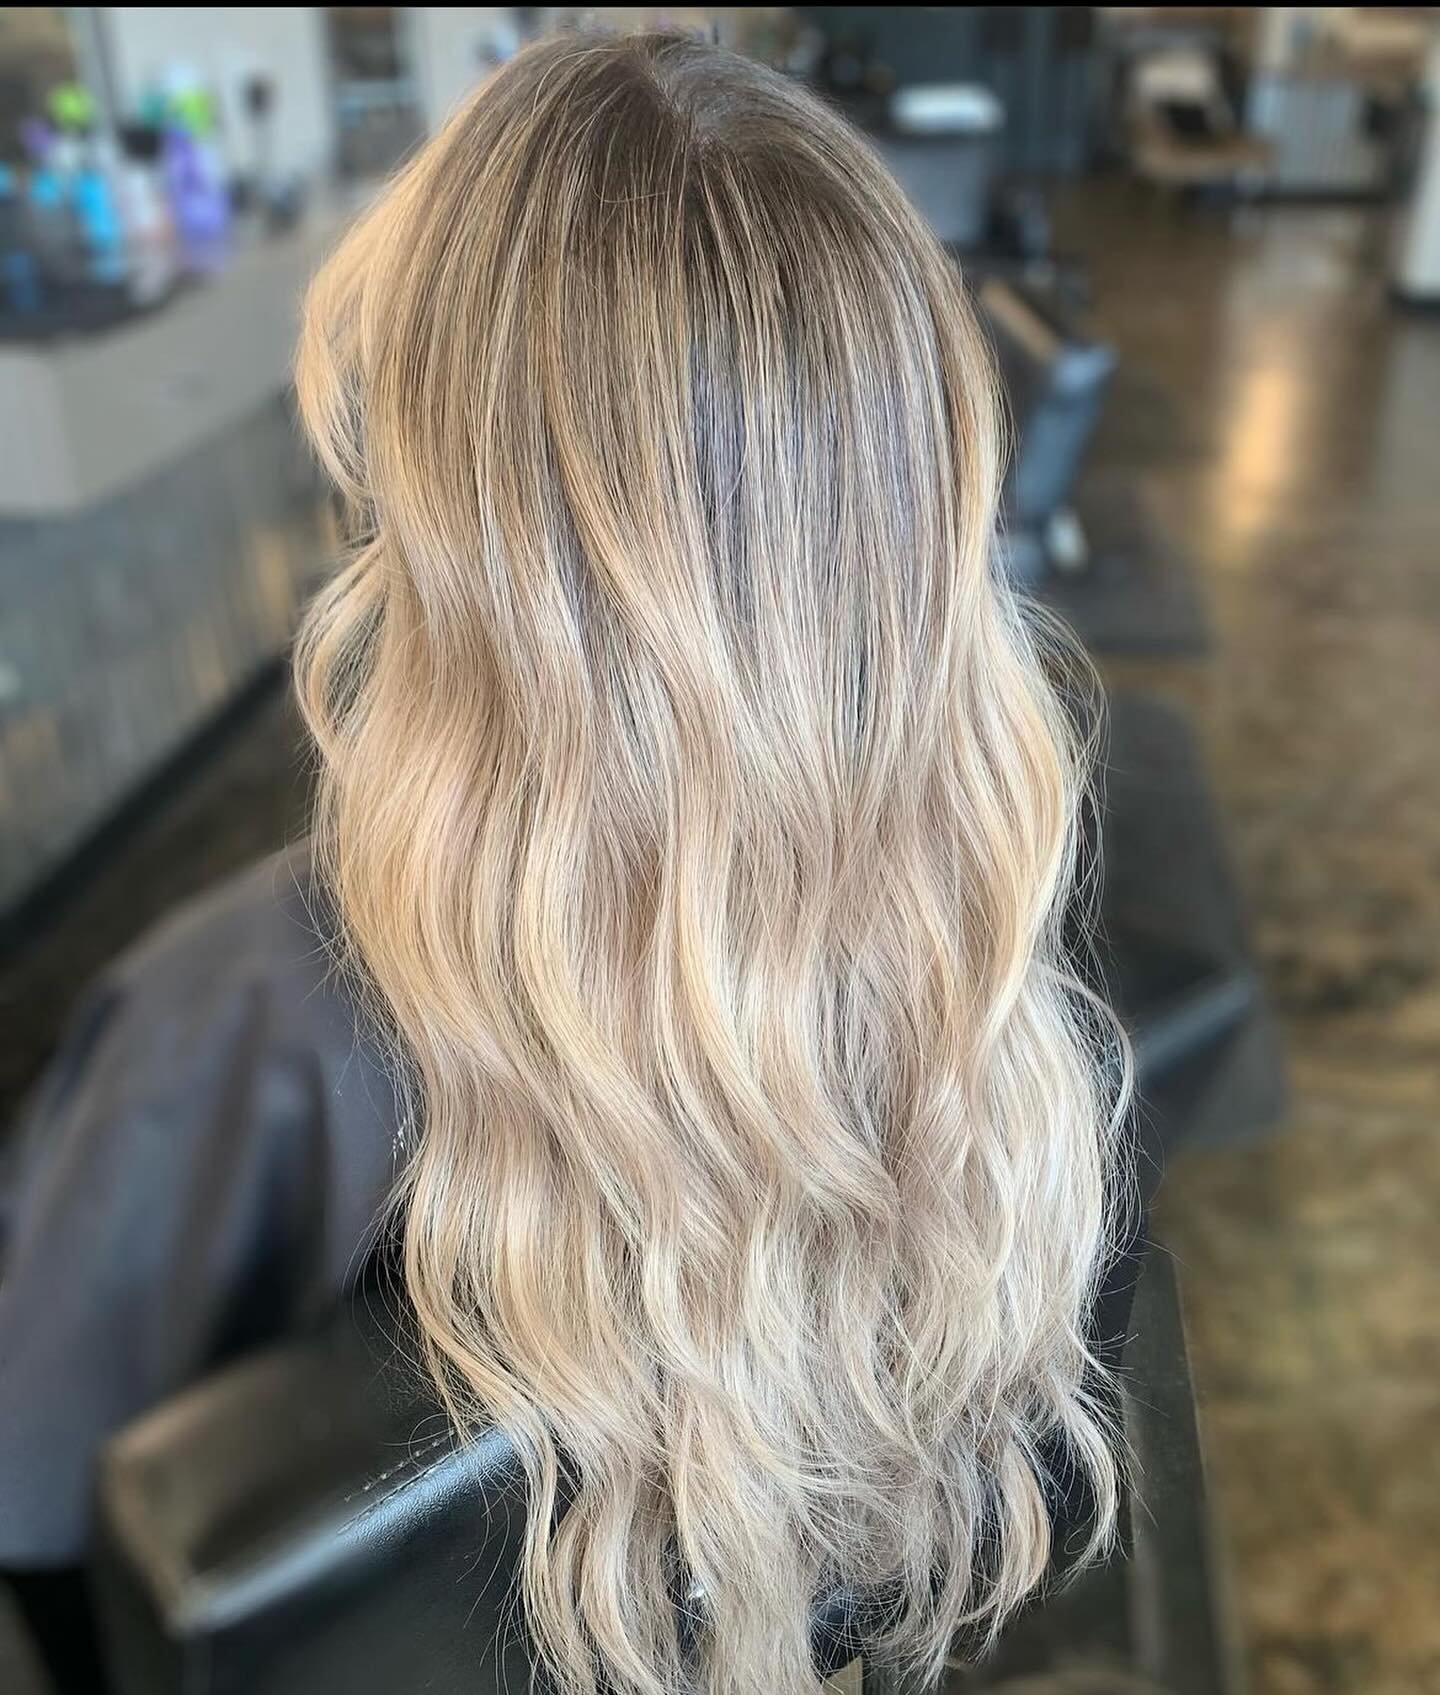 BLNDE SEASON IS UPON US!🤩🤍

And you already KNOW @stylist.lyssa is the girl with all that blonde magic! Book with her today to get the BRIGHTEST blonde of your life! 

-
-
-
Call 505/883/9707 to book today🤍
#blndeszn #blonde #blondehair #blondehai